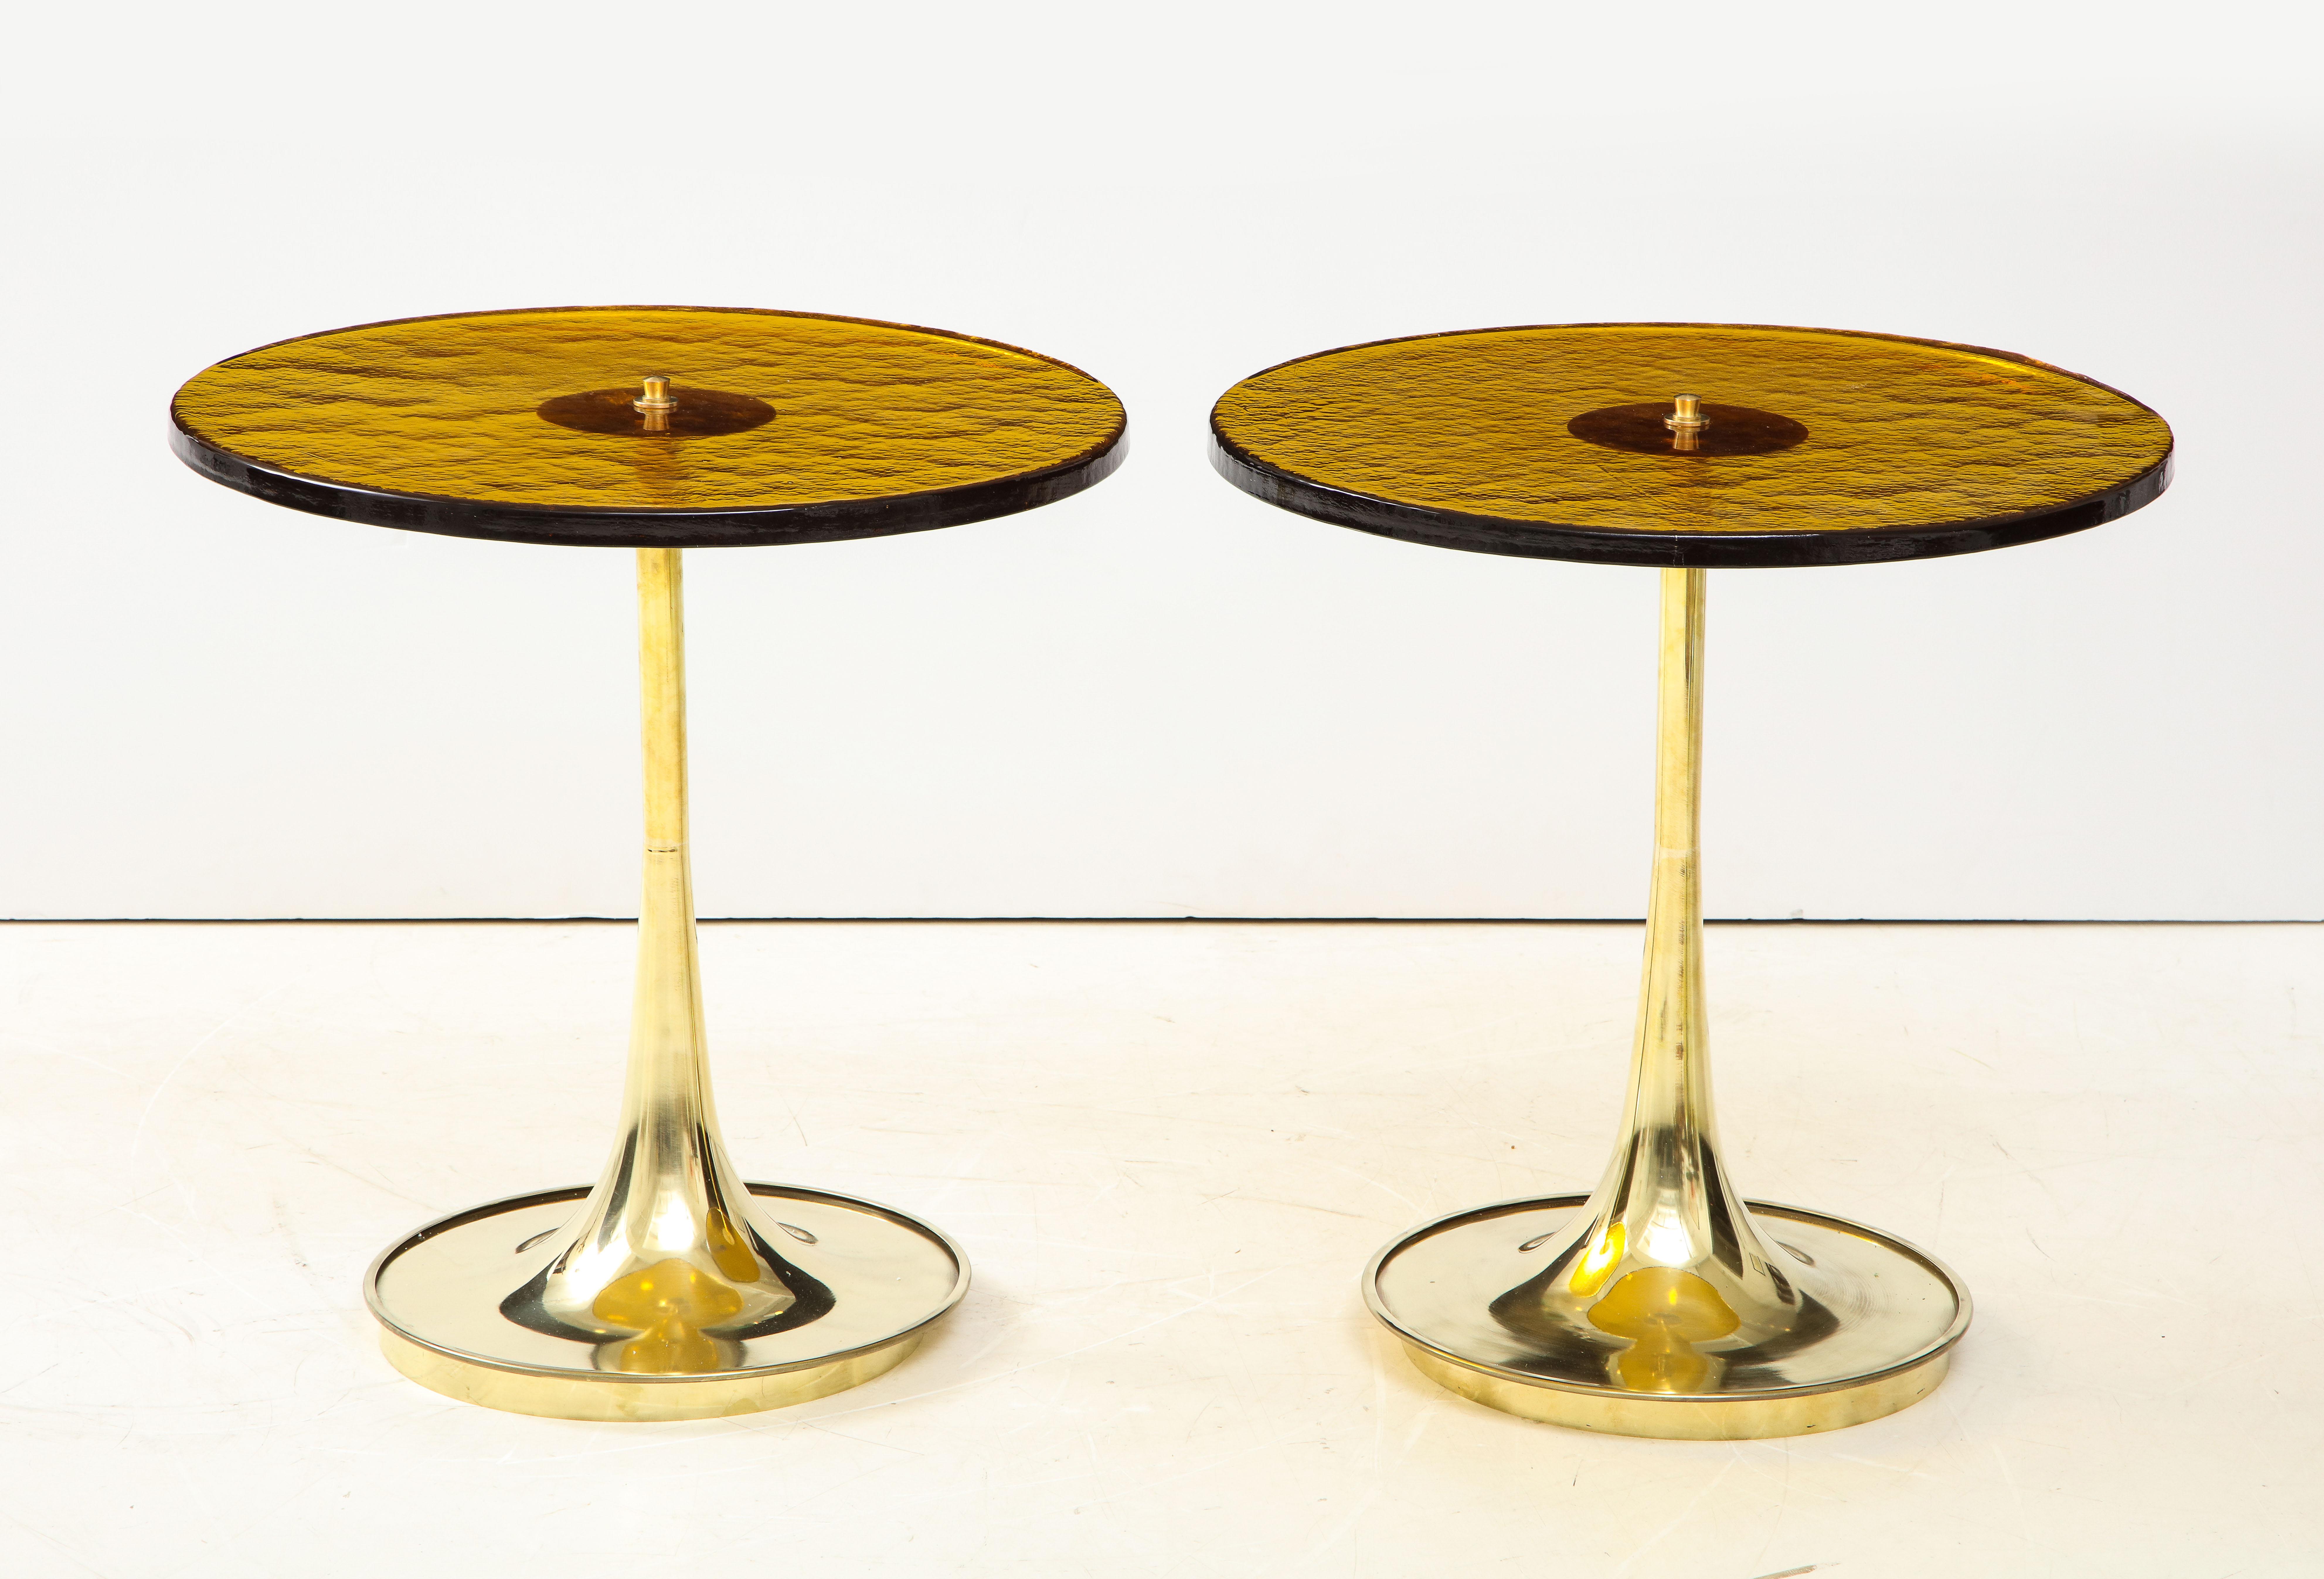 Pair of round bronze murano glass and brass martini tables, Italy. Hand-casted thick and solid bronze colored murano round glass sits atop a hand -turned trumpet-shaped brass base. Modern flat top brass finial screws the glass top to the brass base.